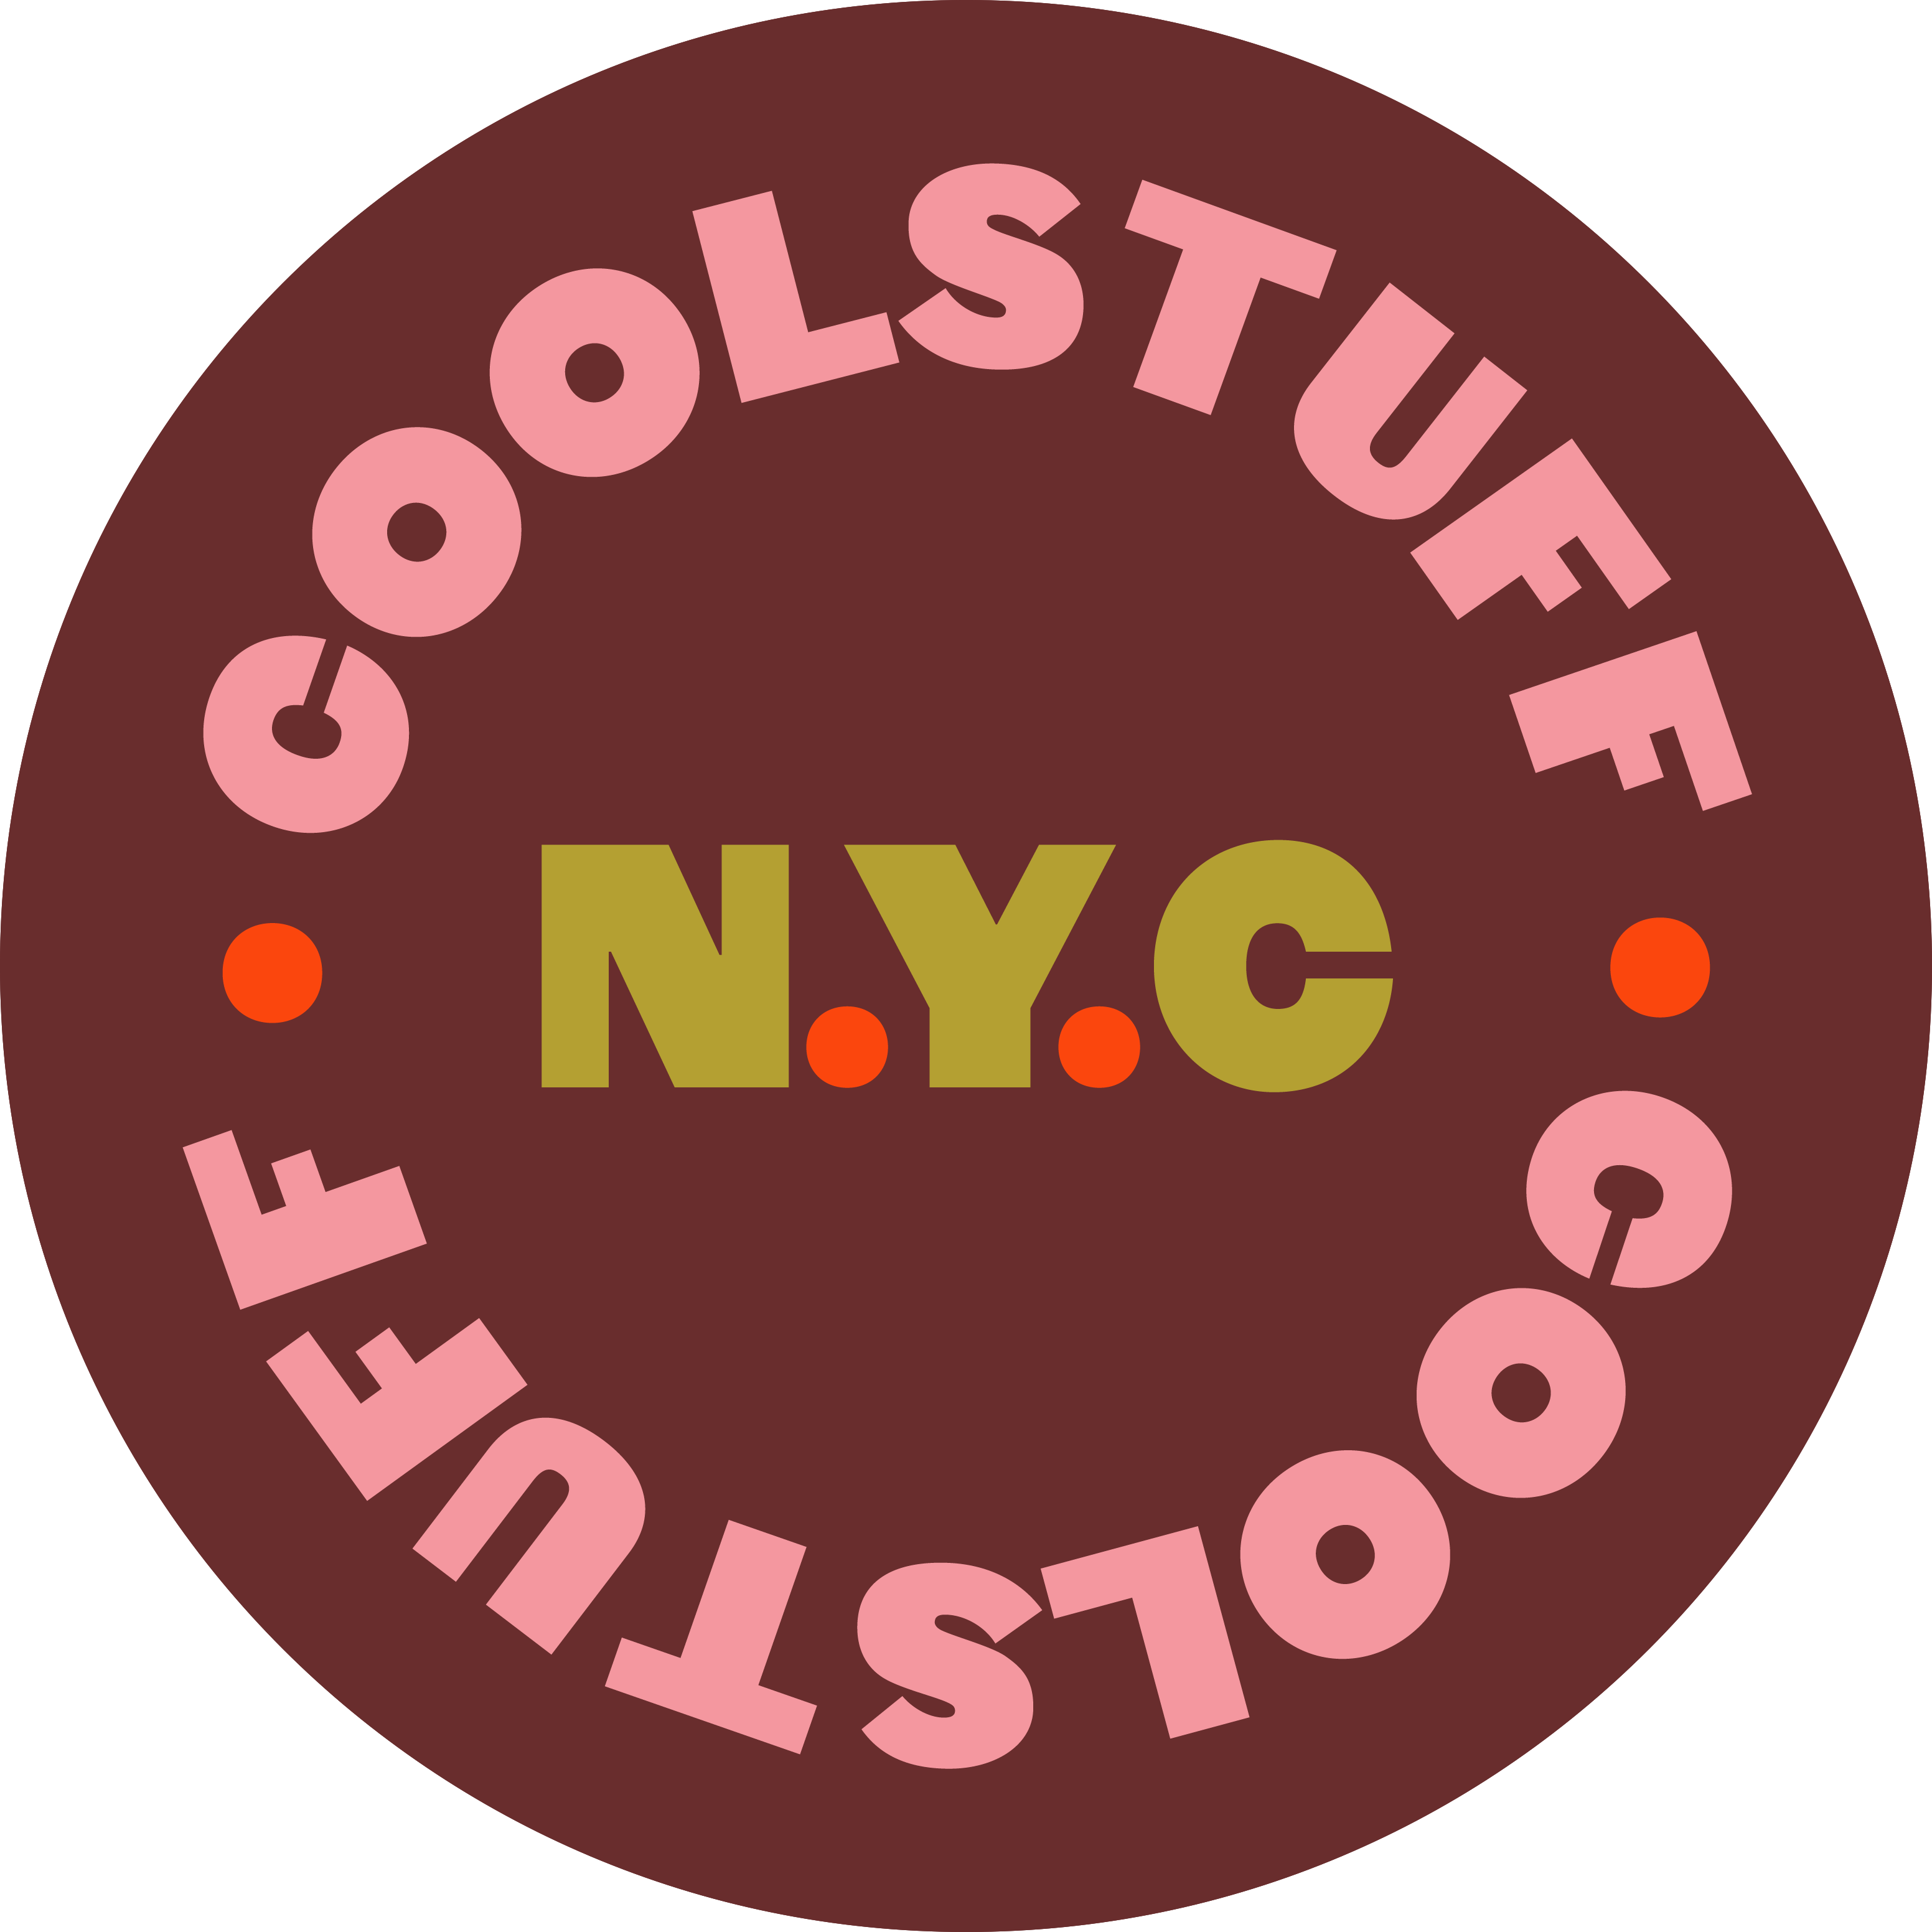 Artwork for coolstuff.nyc